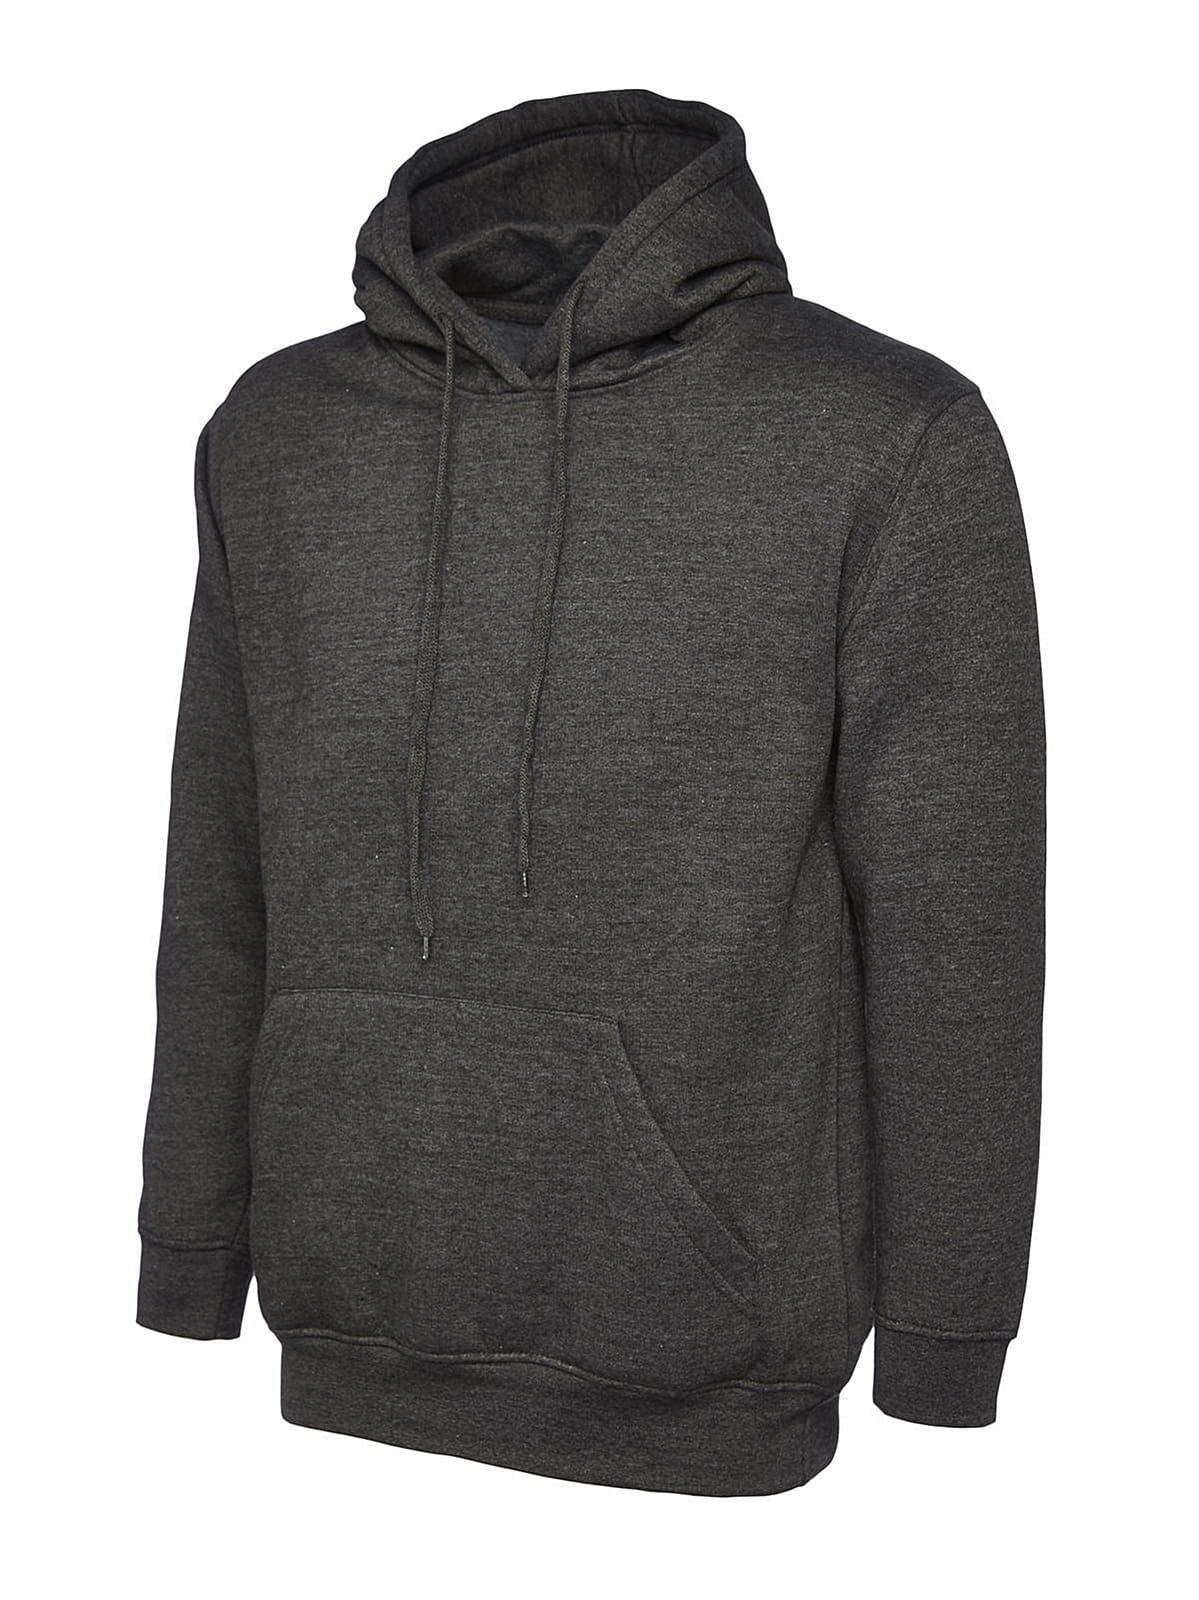 Uneek 300GSM Classic Hoodie in Charcoal (Product Code: UC502)